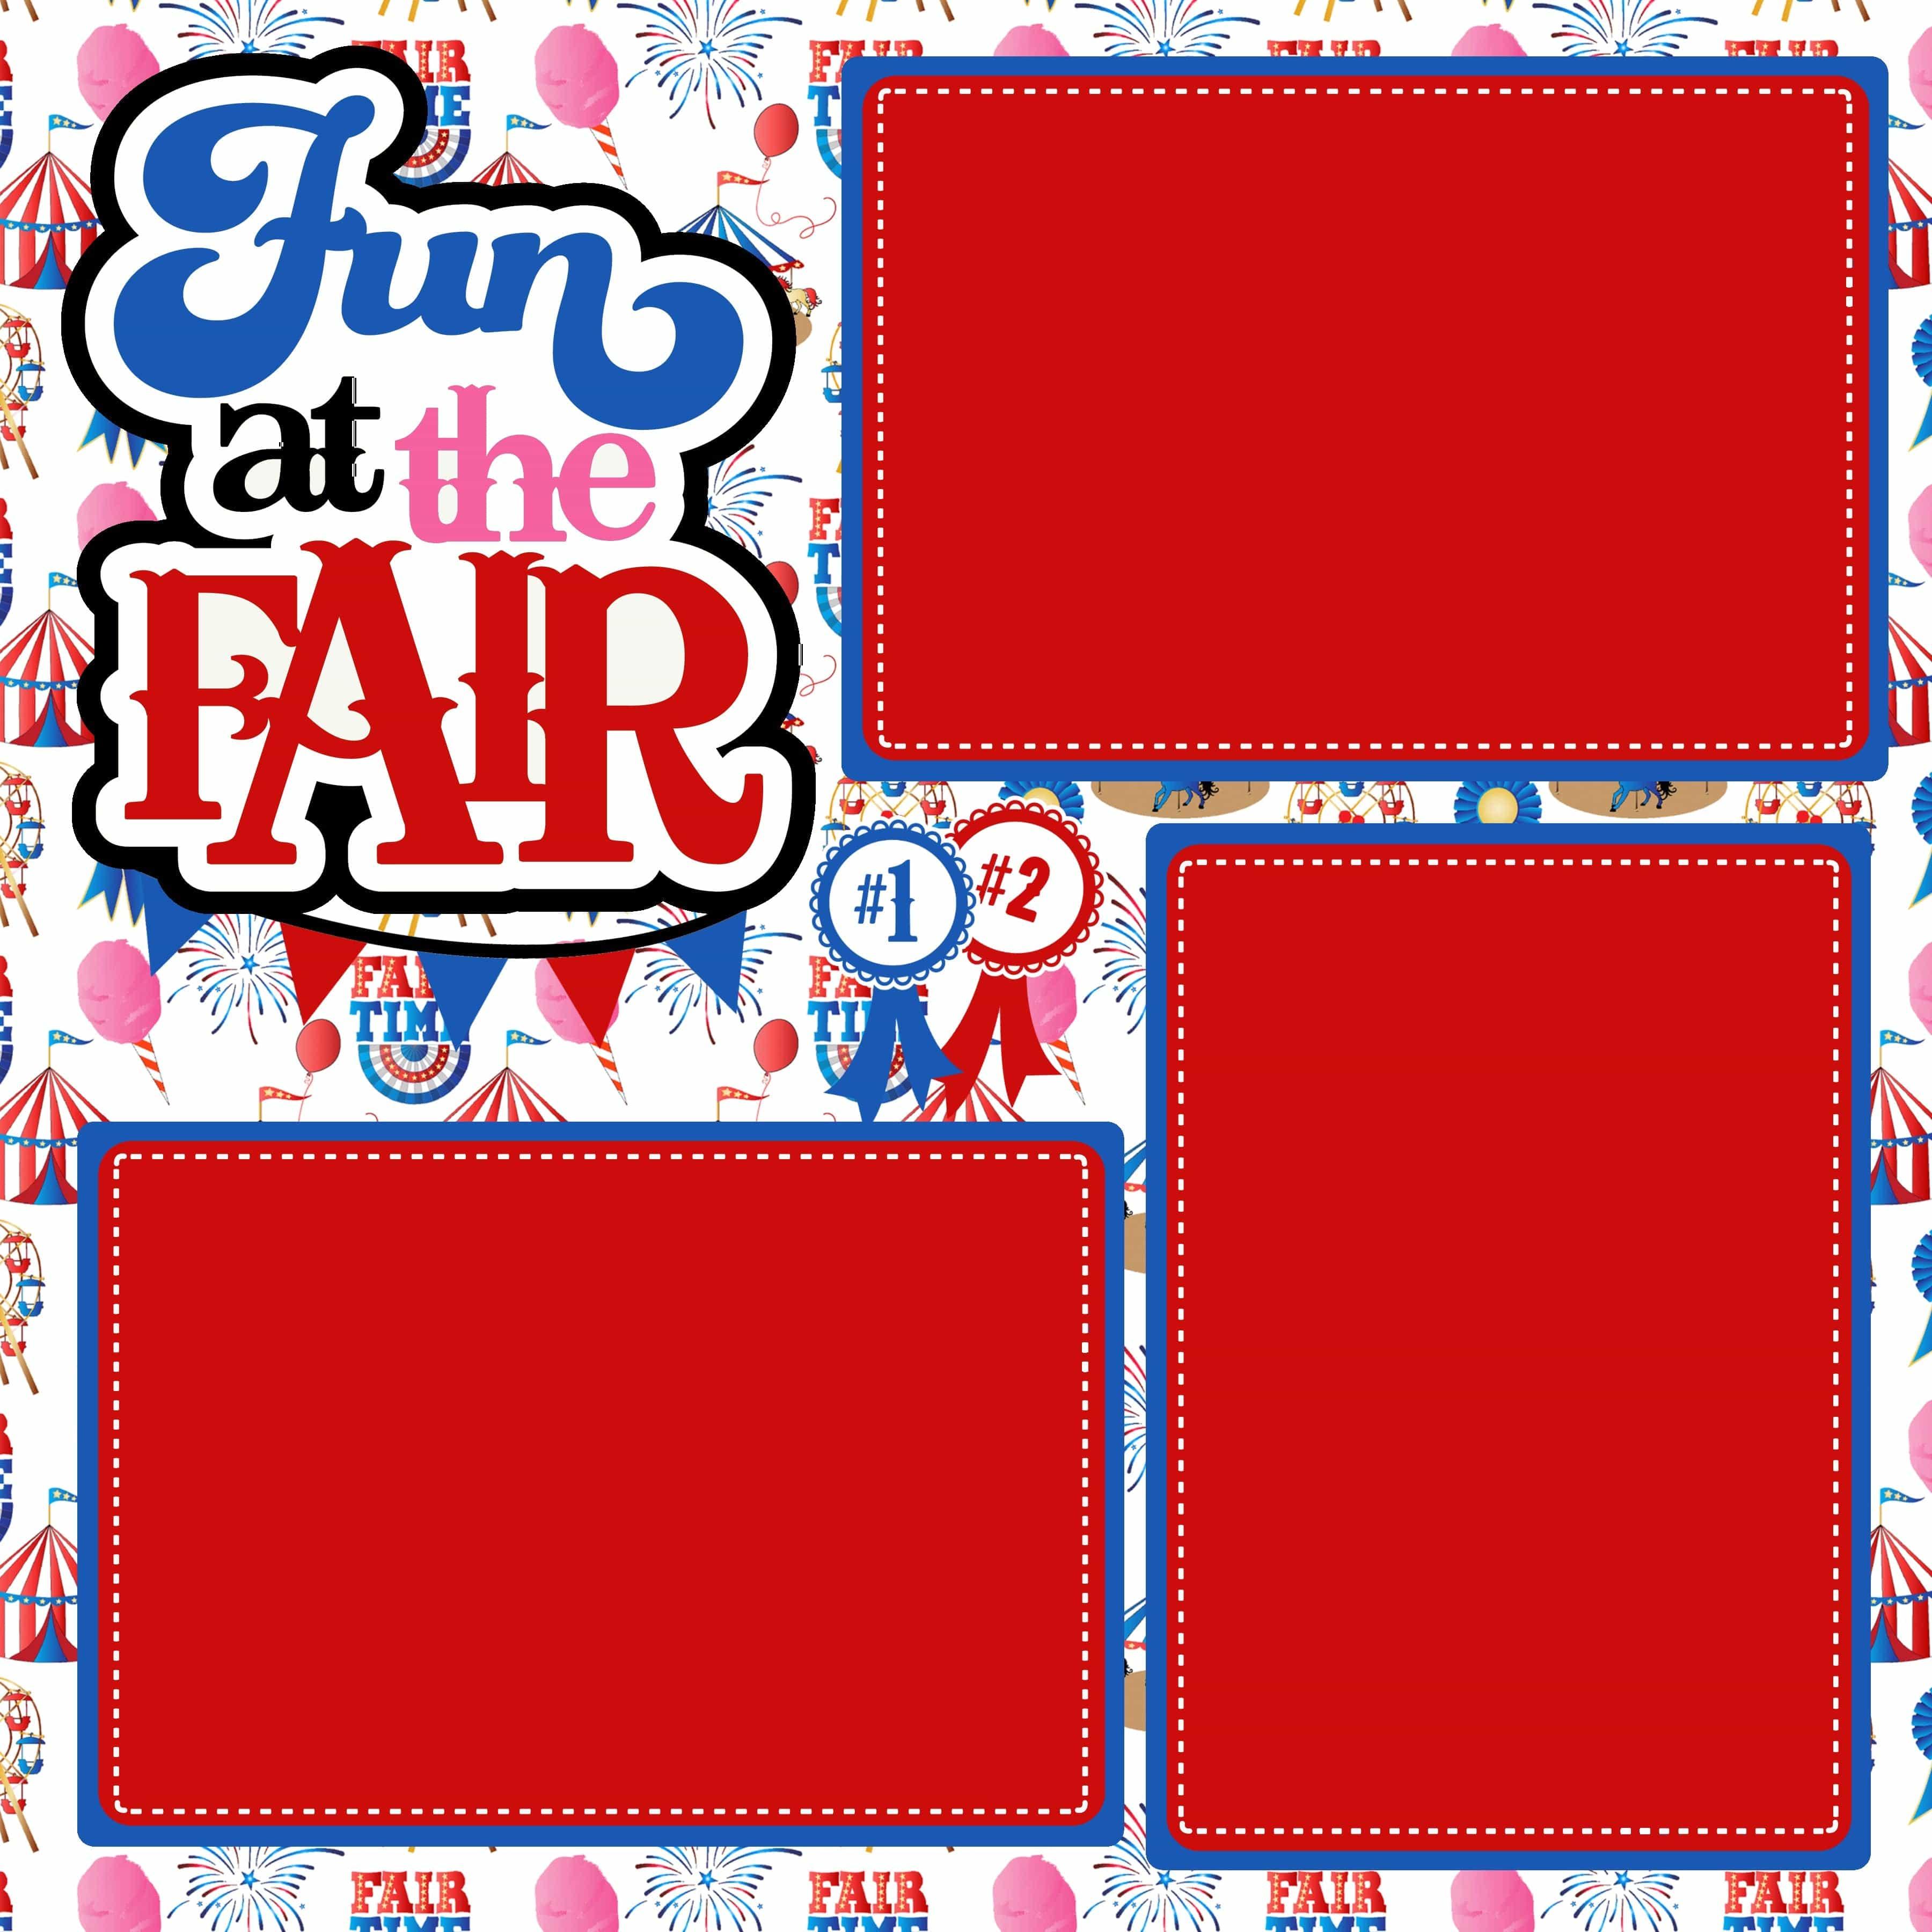 Fun At The Fair (2) - 12 x 12 Premade, Printed Scrapbook Pages by SSC Designs - Scrapbook Supply Companies